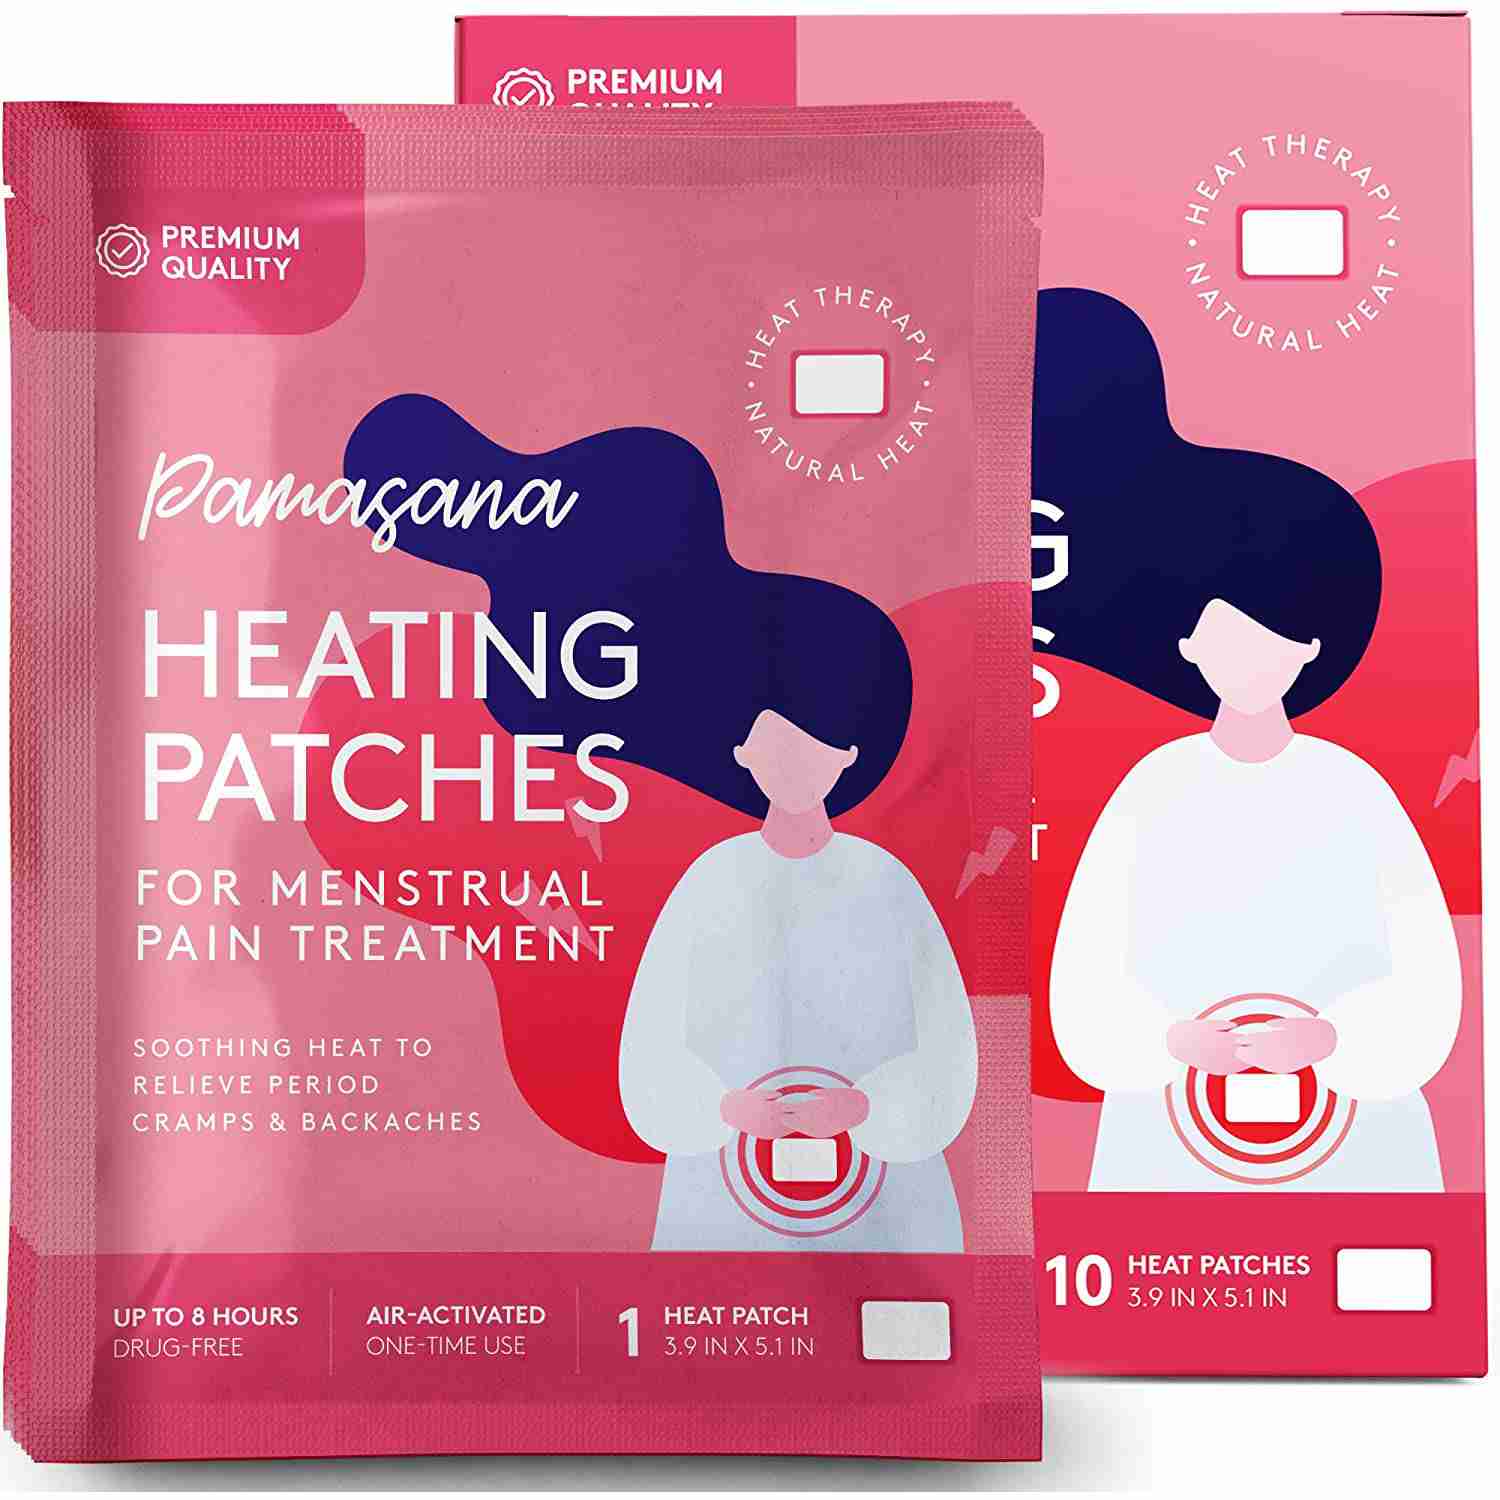 period-cramps-pain-relief with cash back rebate